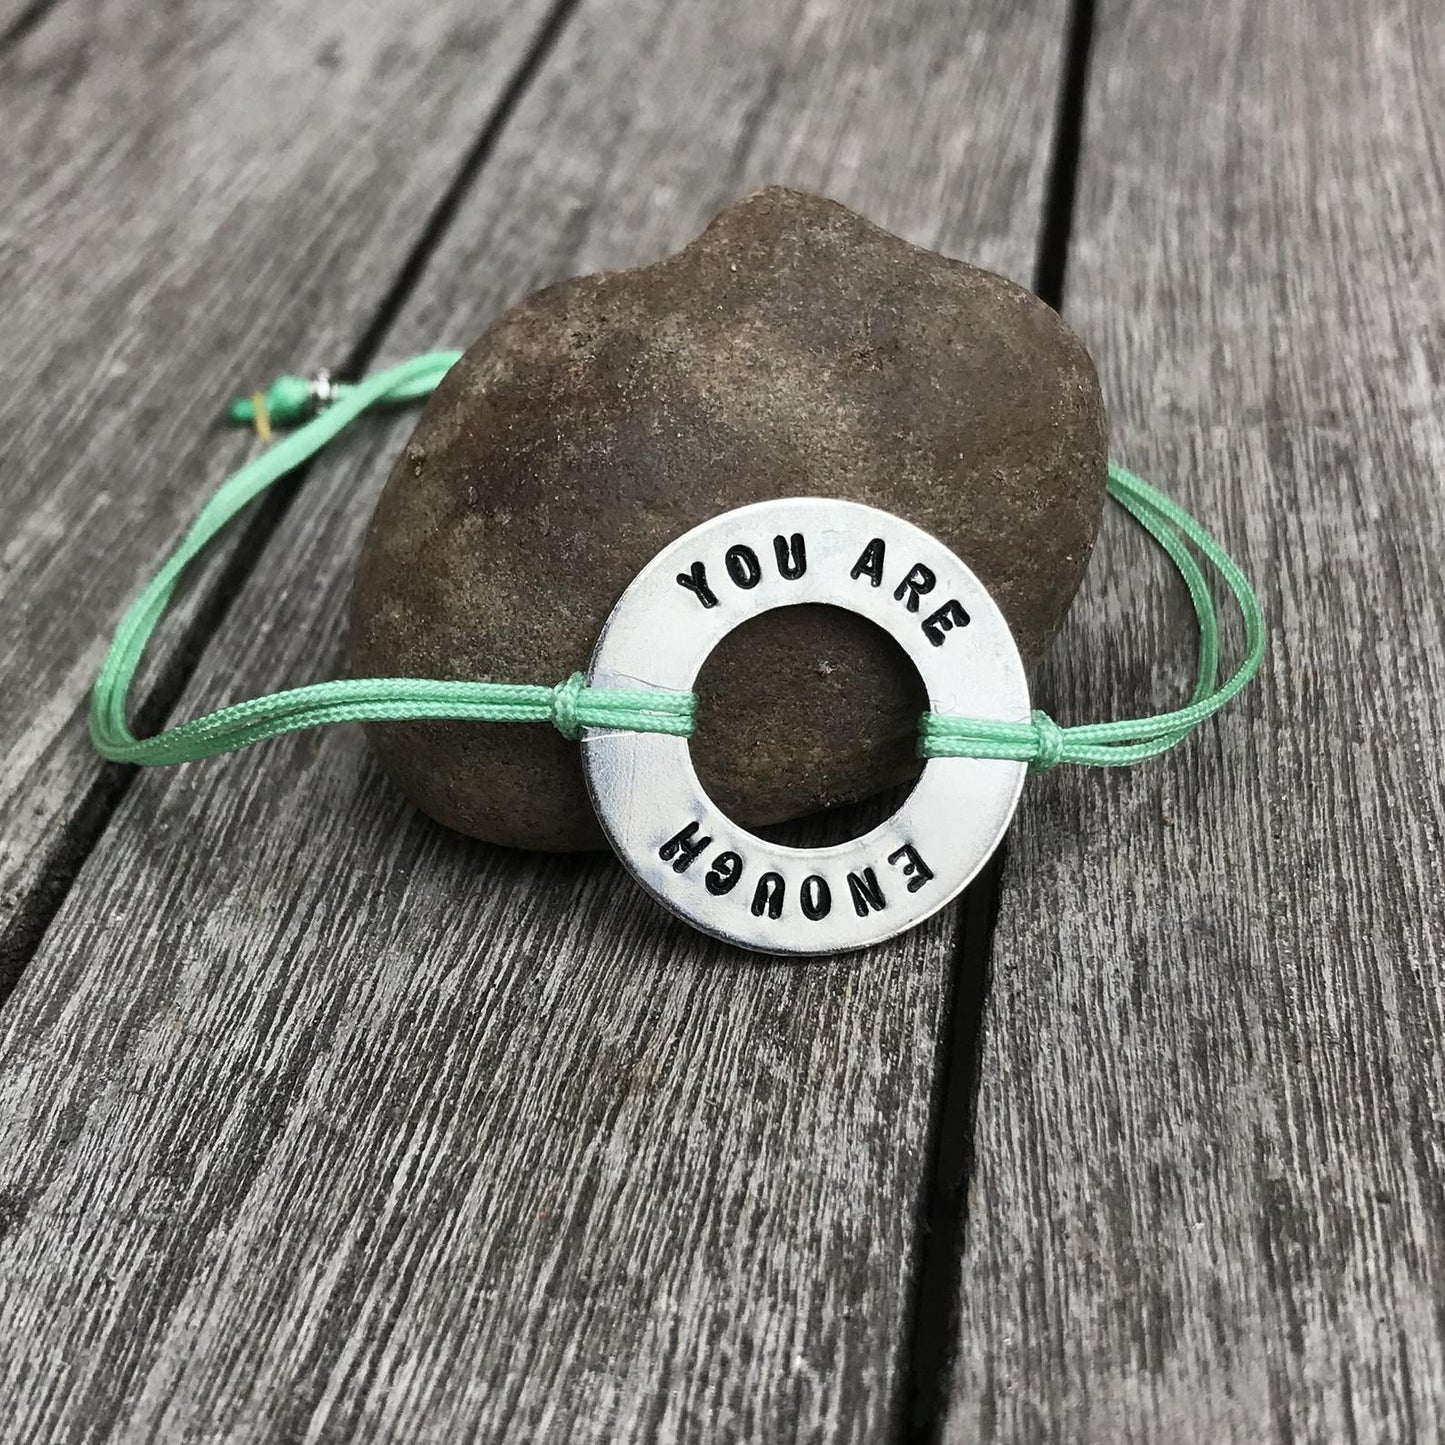 Custom bracelet, You are enough, I am enough, Washer Bracelet, Message Bracelet, Motivational Bracelet, CHOOSE YOUR WORD, Motivational Gift